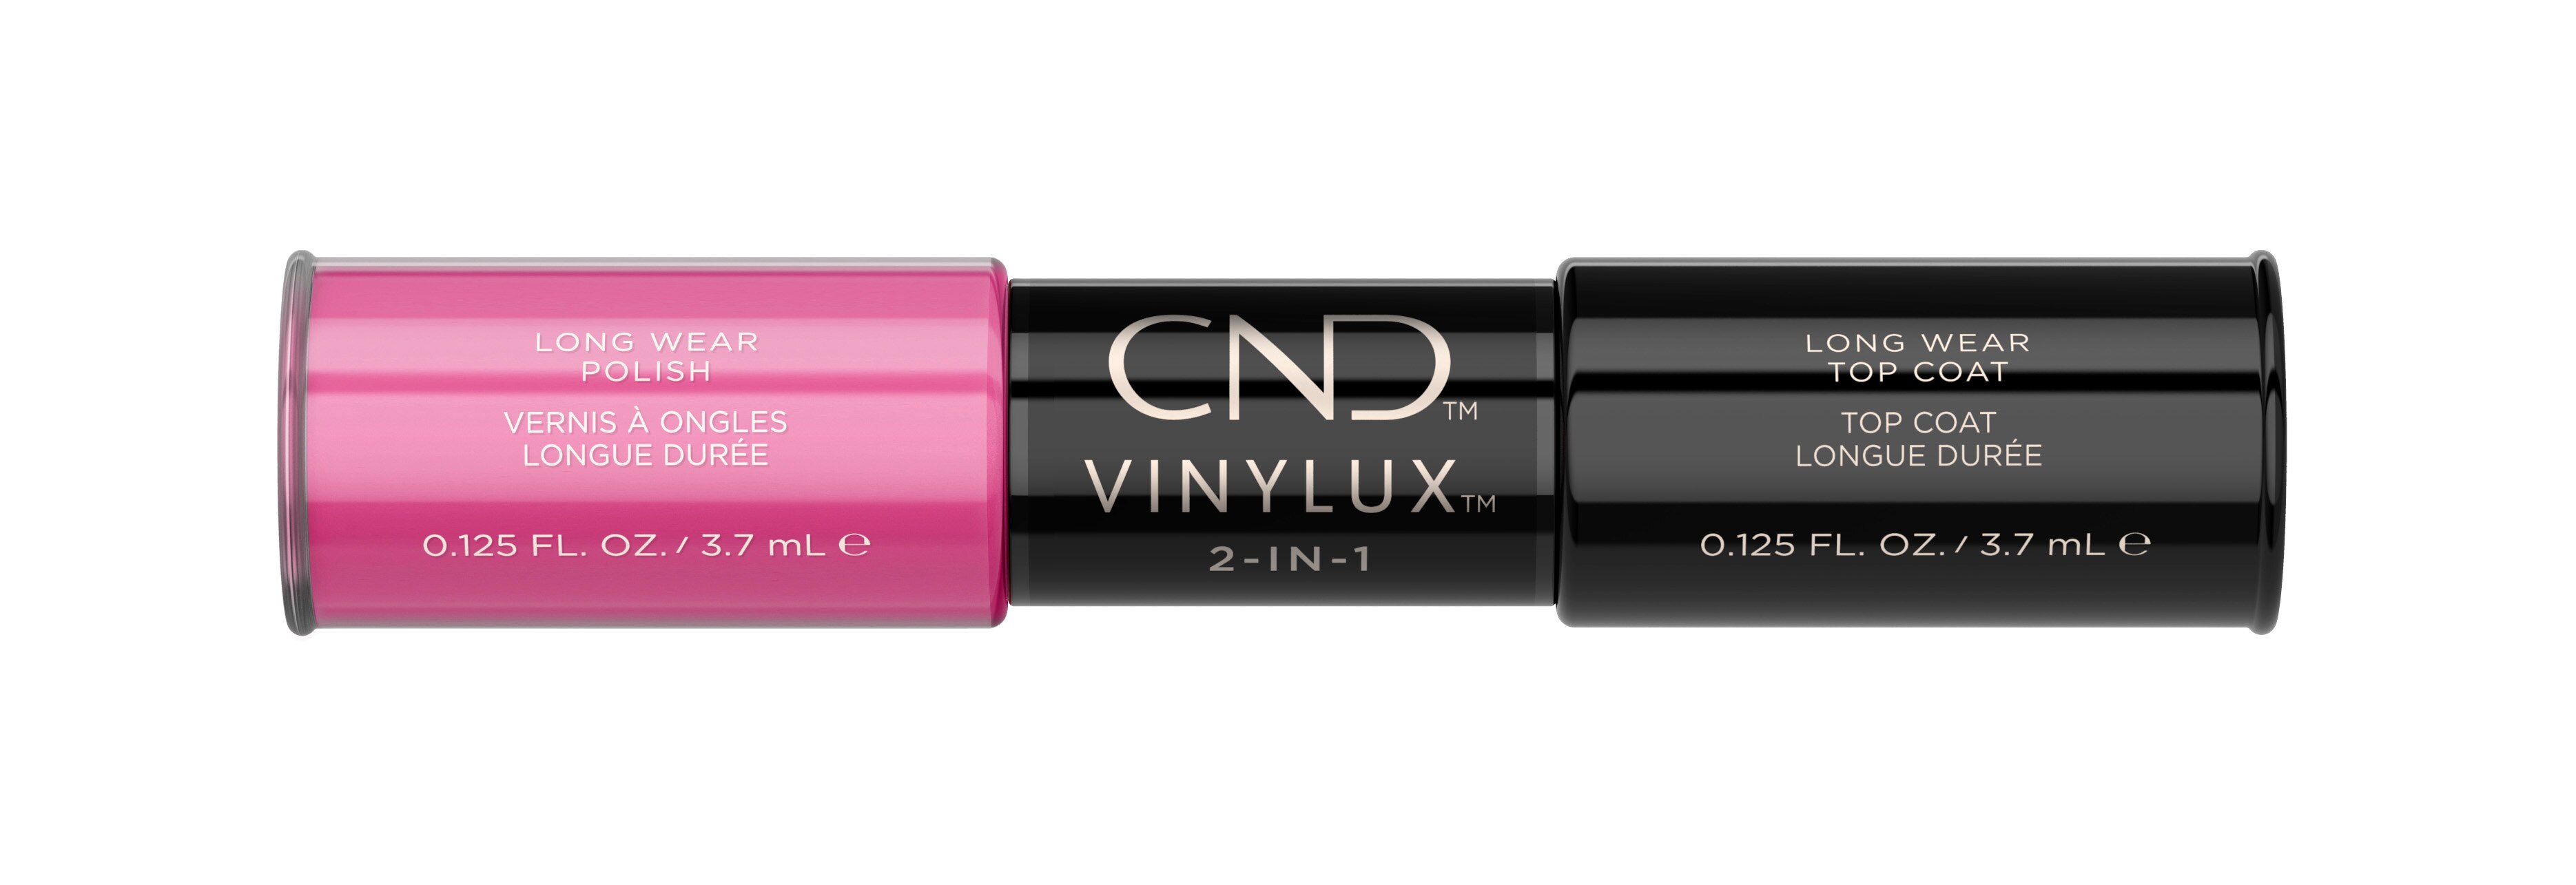 10. CND Vinylux Long Wear Nail Polish in "Different Color" - wide 2